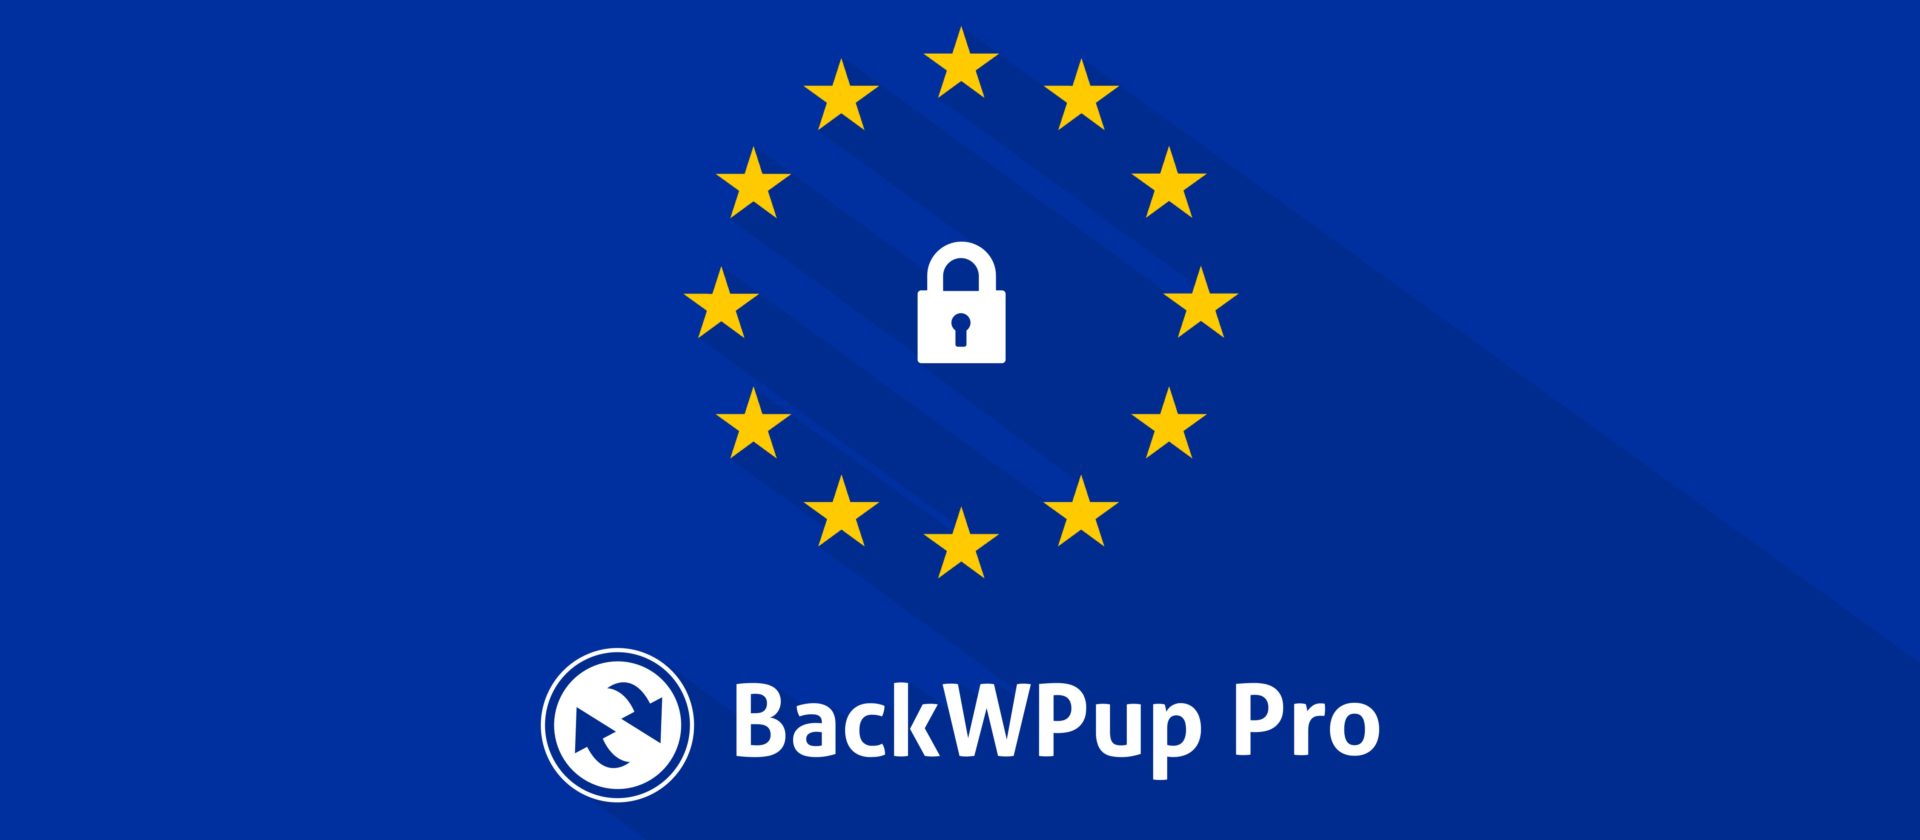 Make your WordPress backup plugin GDPR compliant with BackWPup.